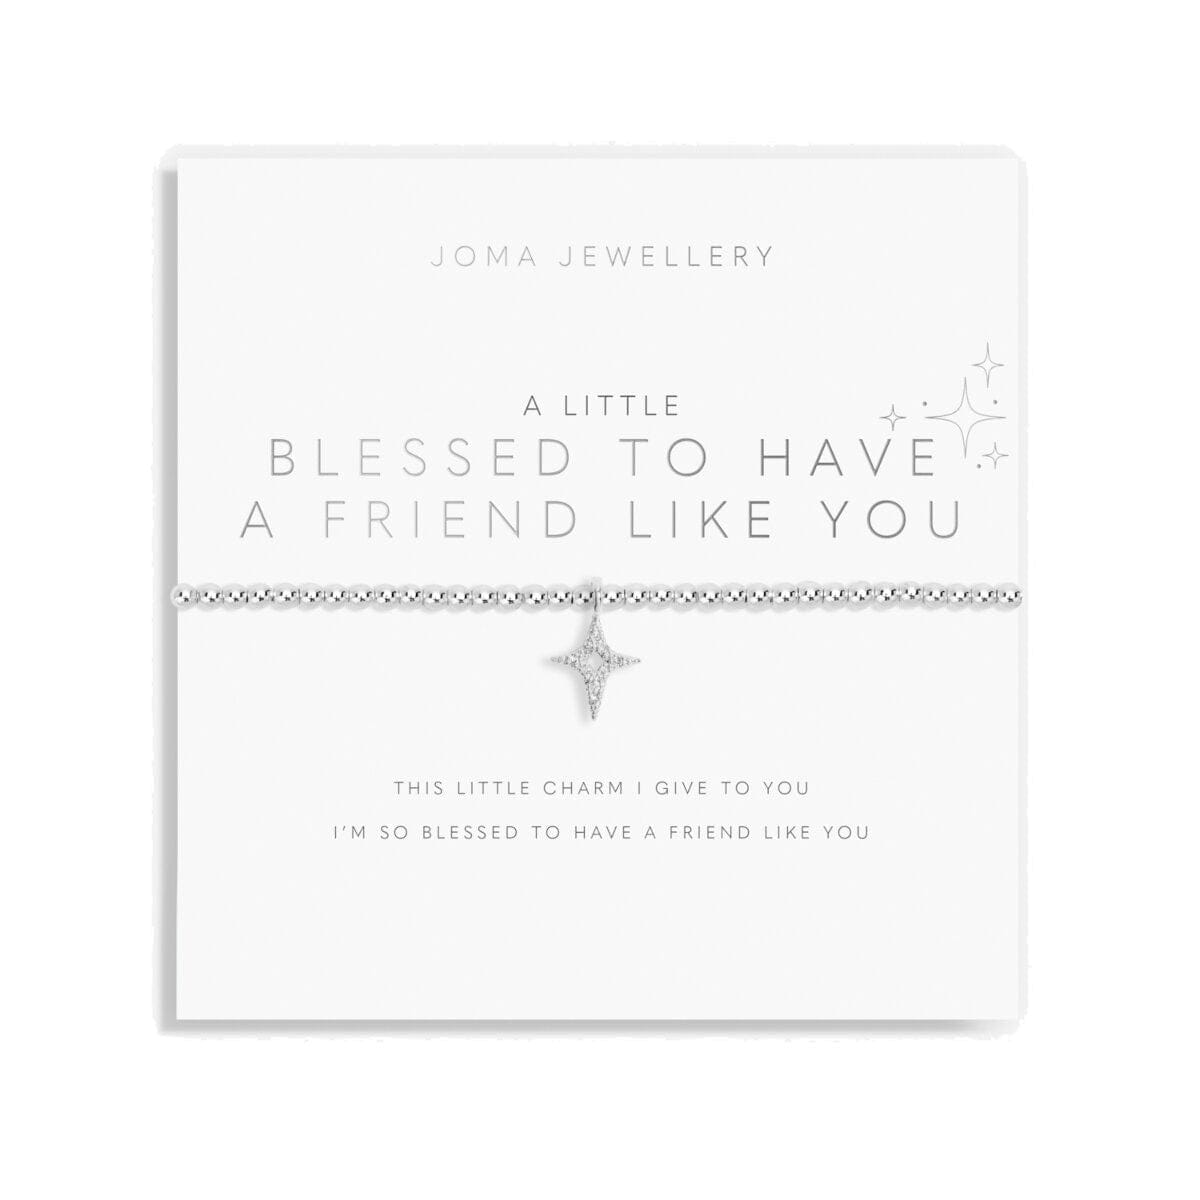 Joma Jewellery Bracelet Joma Jewellery Bracelet - A Little Blessed To Have A Friend Like You